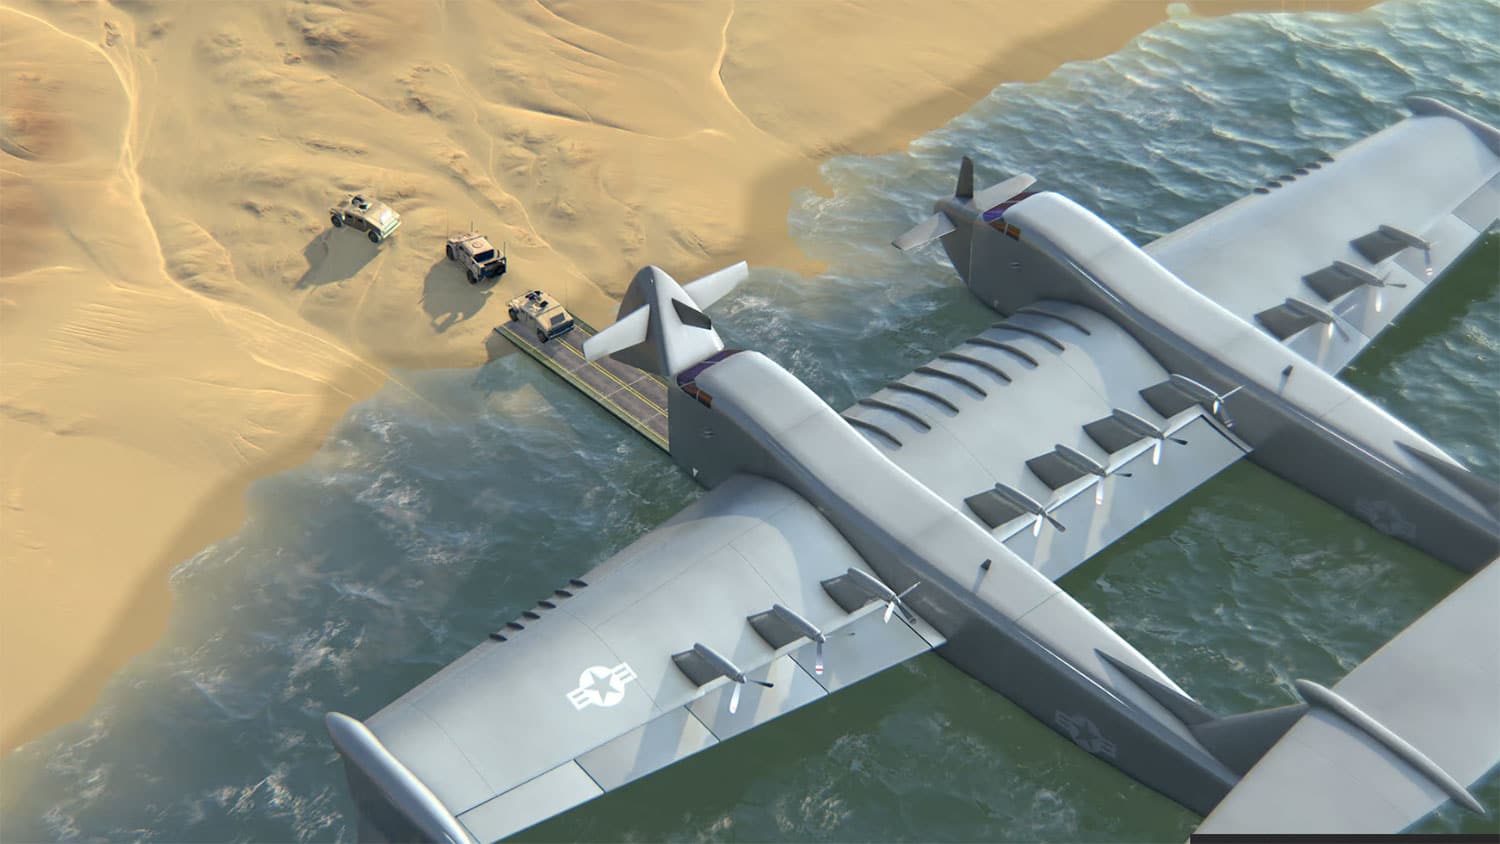 DARPA’s Liberty Lifter Seaplane Wing-in-Ground Effect full-scale demonstrator is designed to carry heavy payloads over long distances.